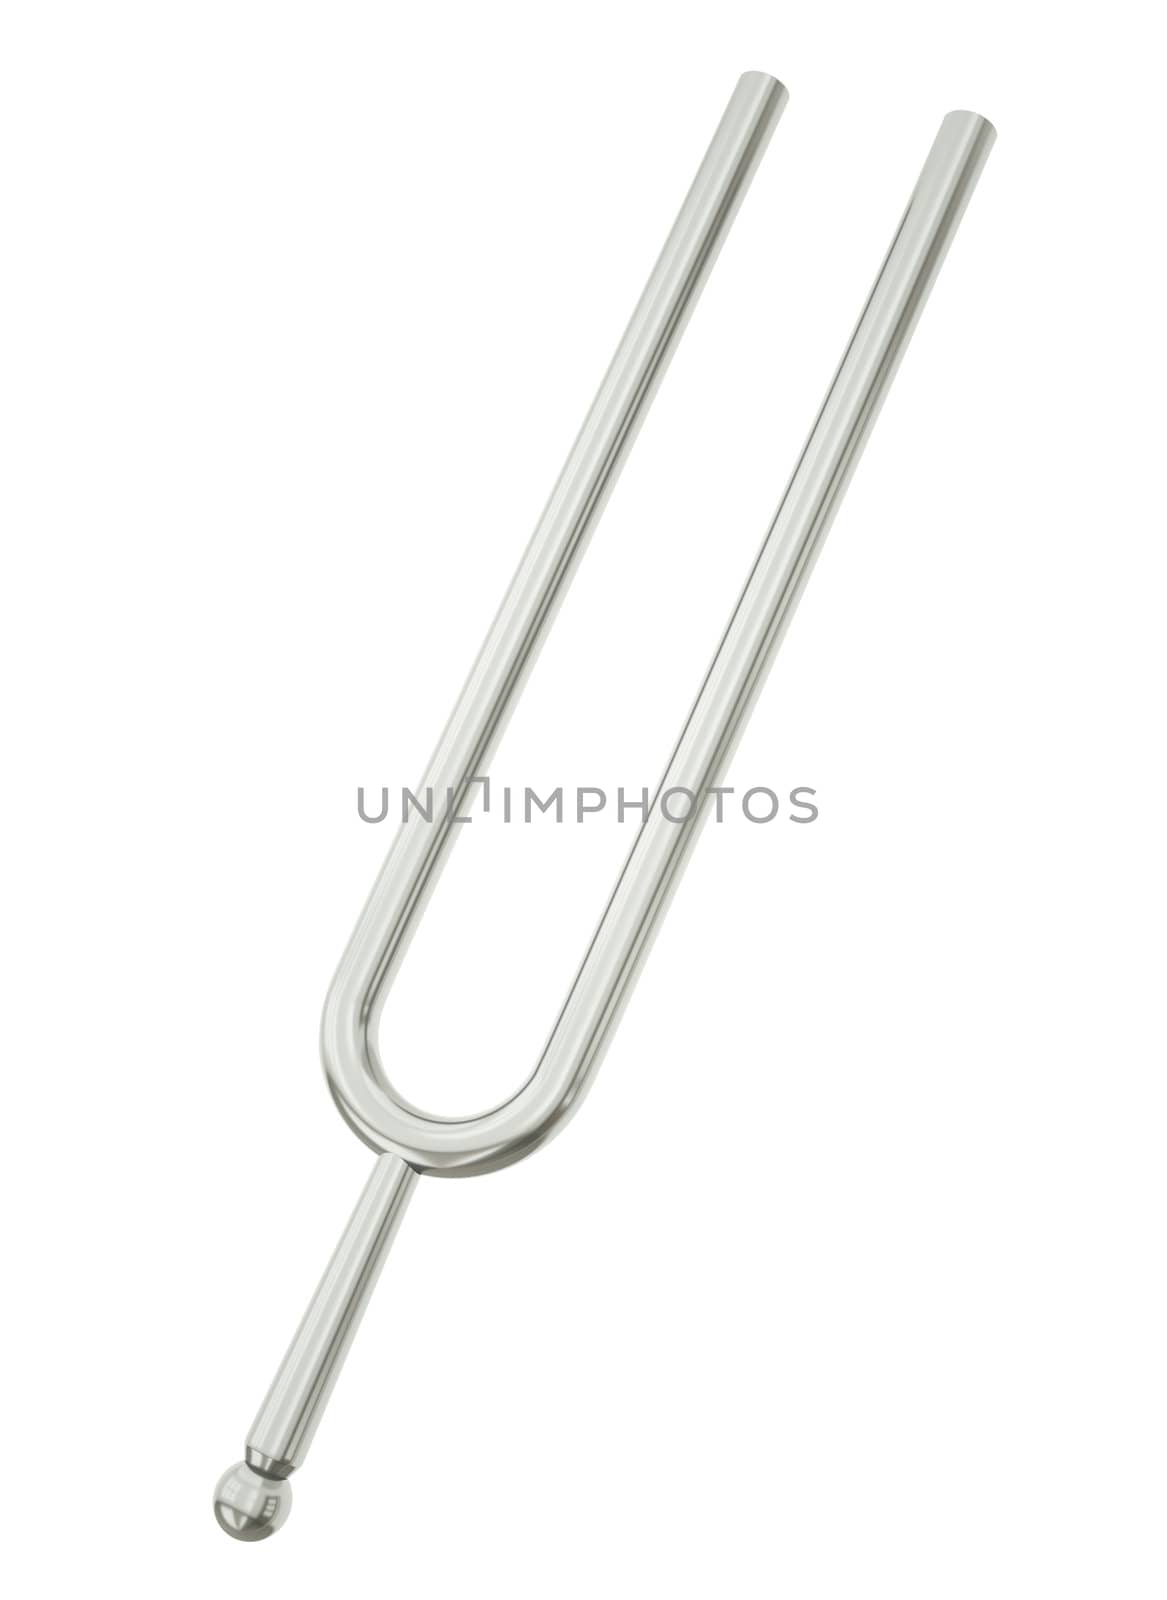 Tuning fork isolated on white background. 3D render.